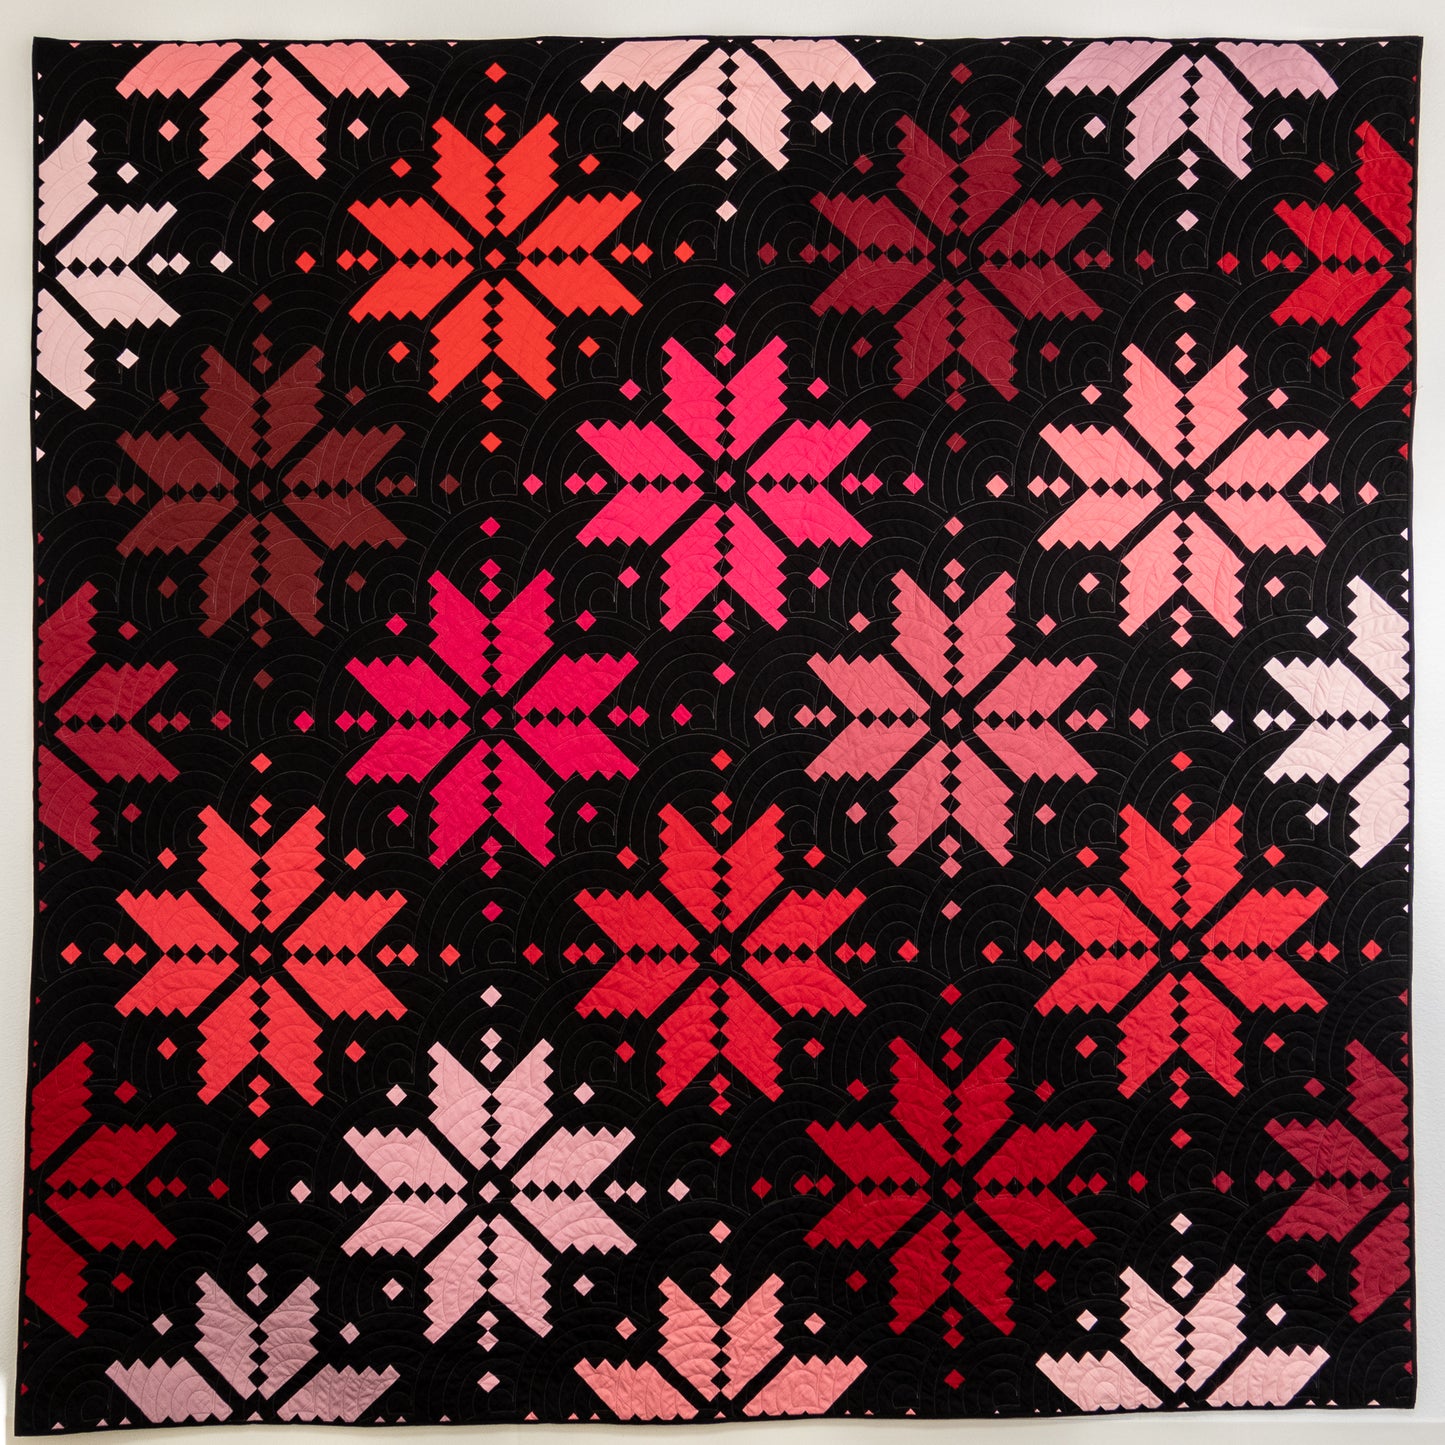 Knitted Star Quilt in Red Magenta Solids - Sewfinity.com